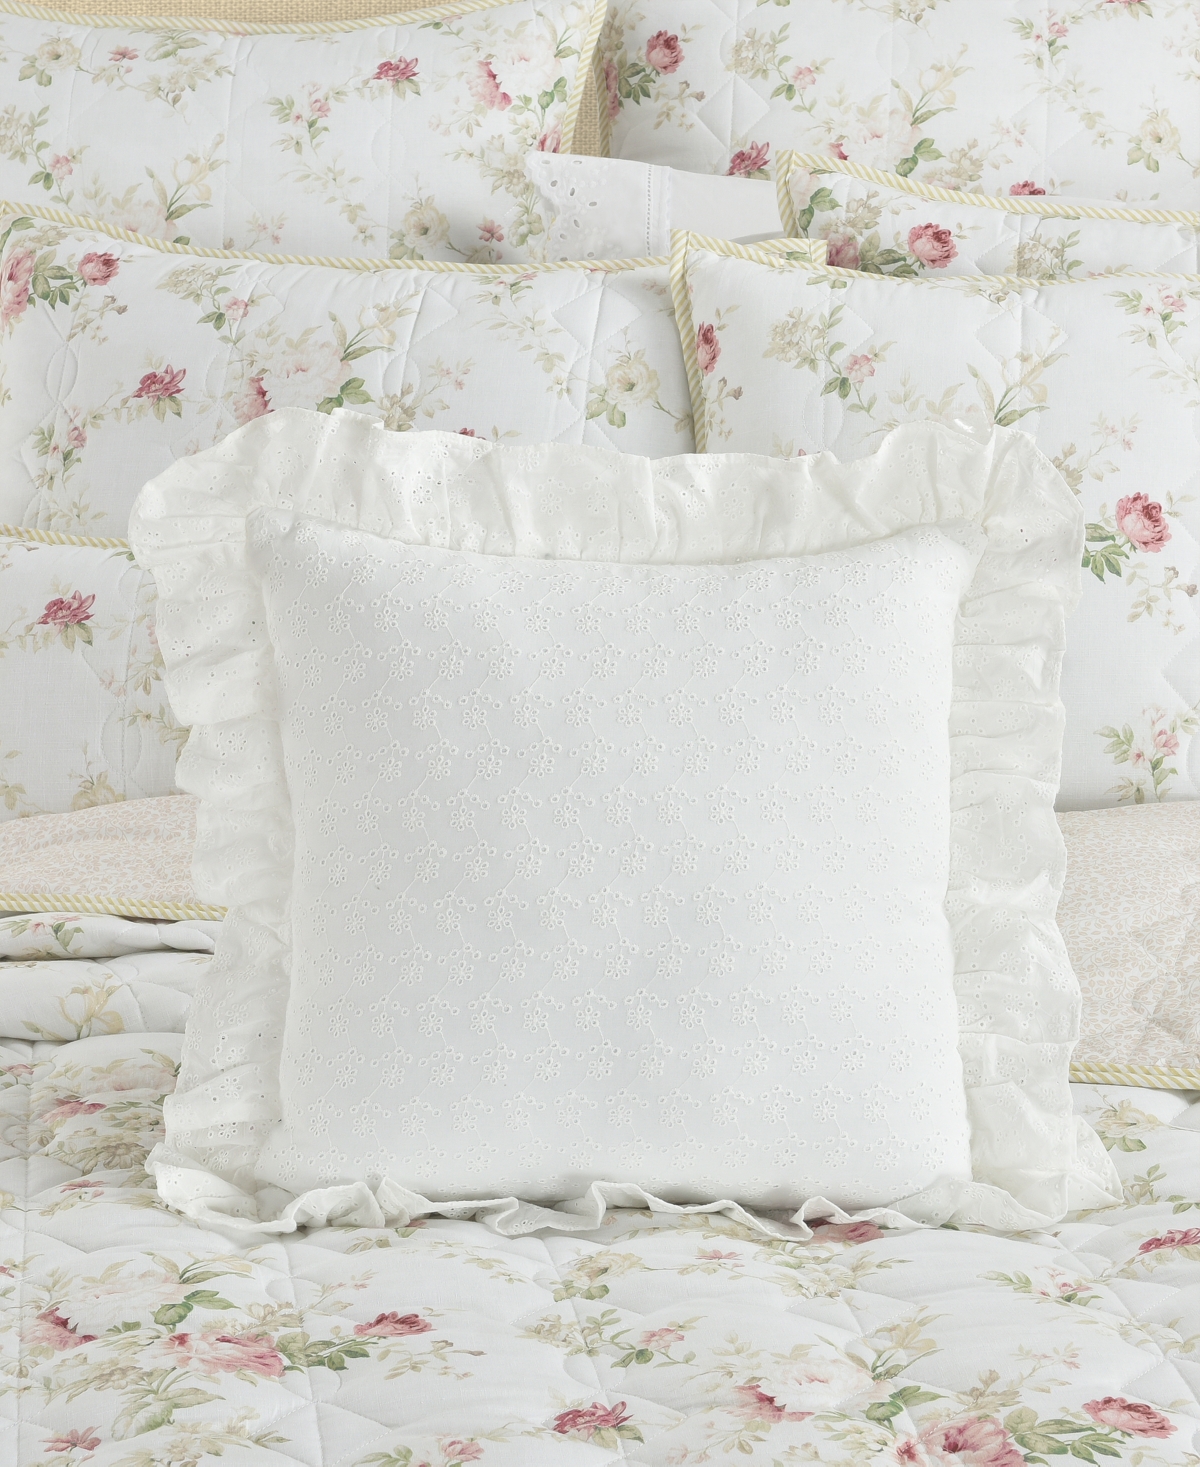 Piper & Wright Amalia Embellished Decorative Pillow, 16" X 16" In Rose